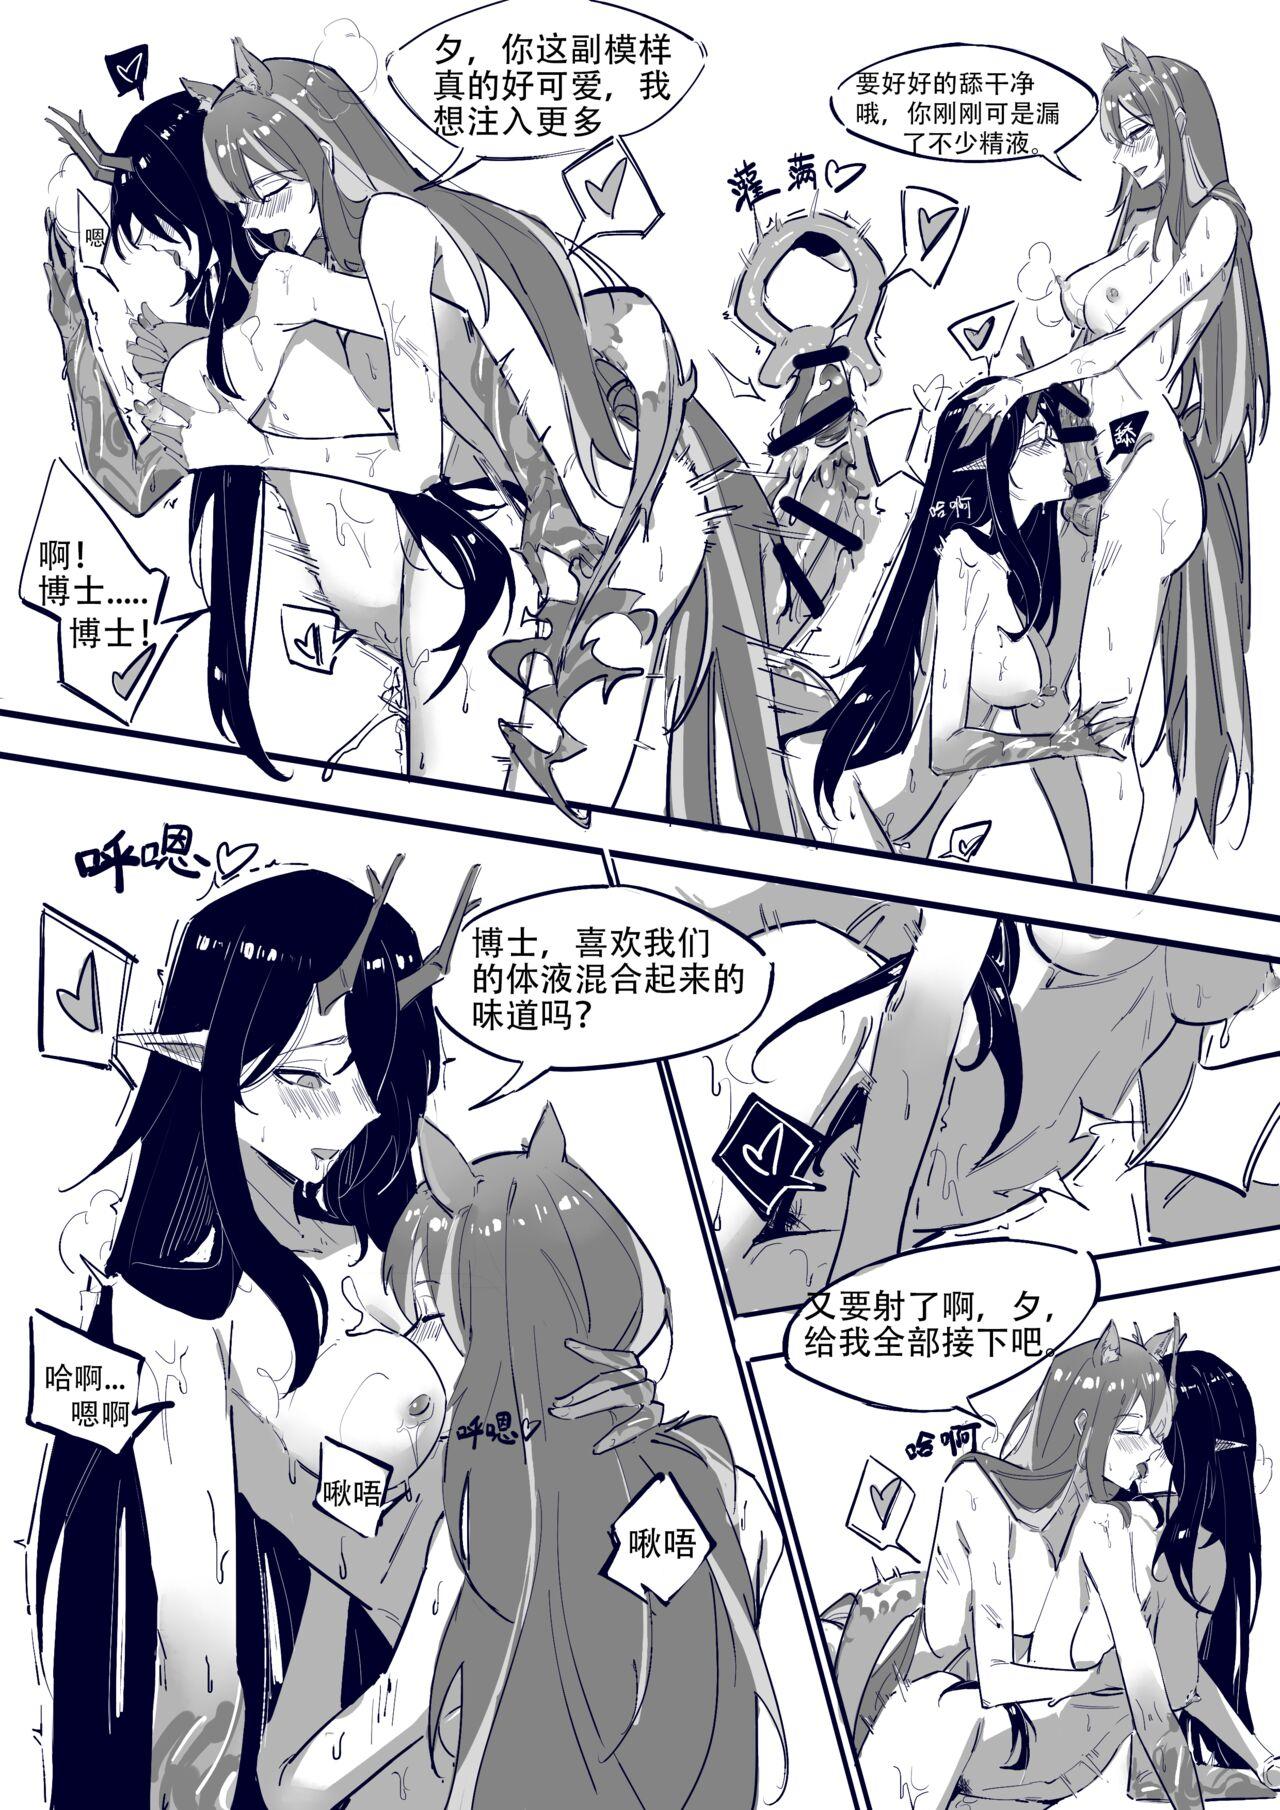 Awesome [D仔] Doctor vs Dragon Bubble (Full) | 博士大战龙泡泡 (完整版) (Arknights) [Chinese] - Arknights Petite Teenager - Page 11